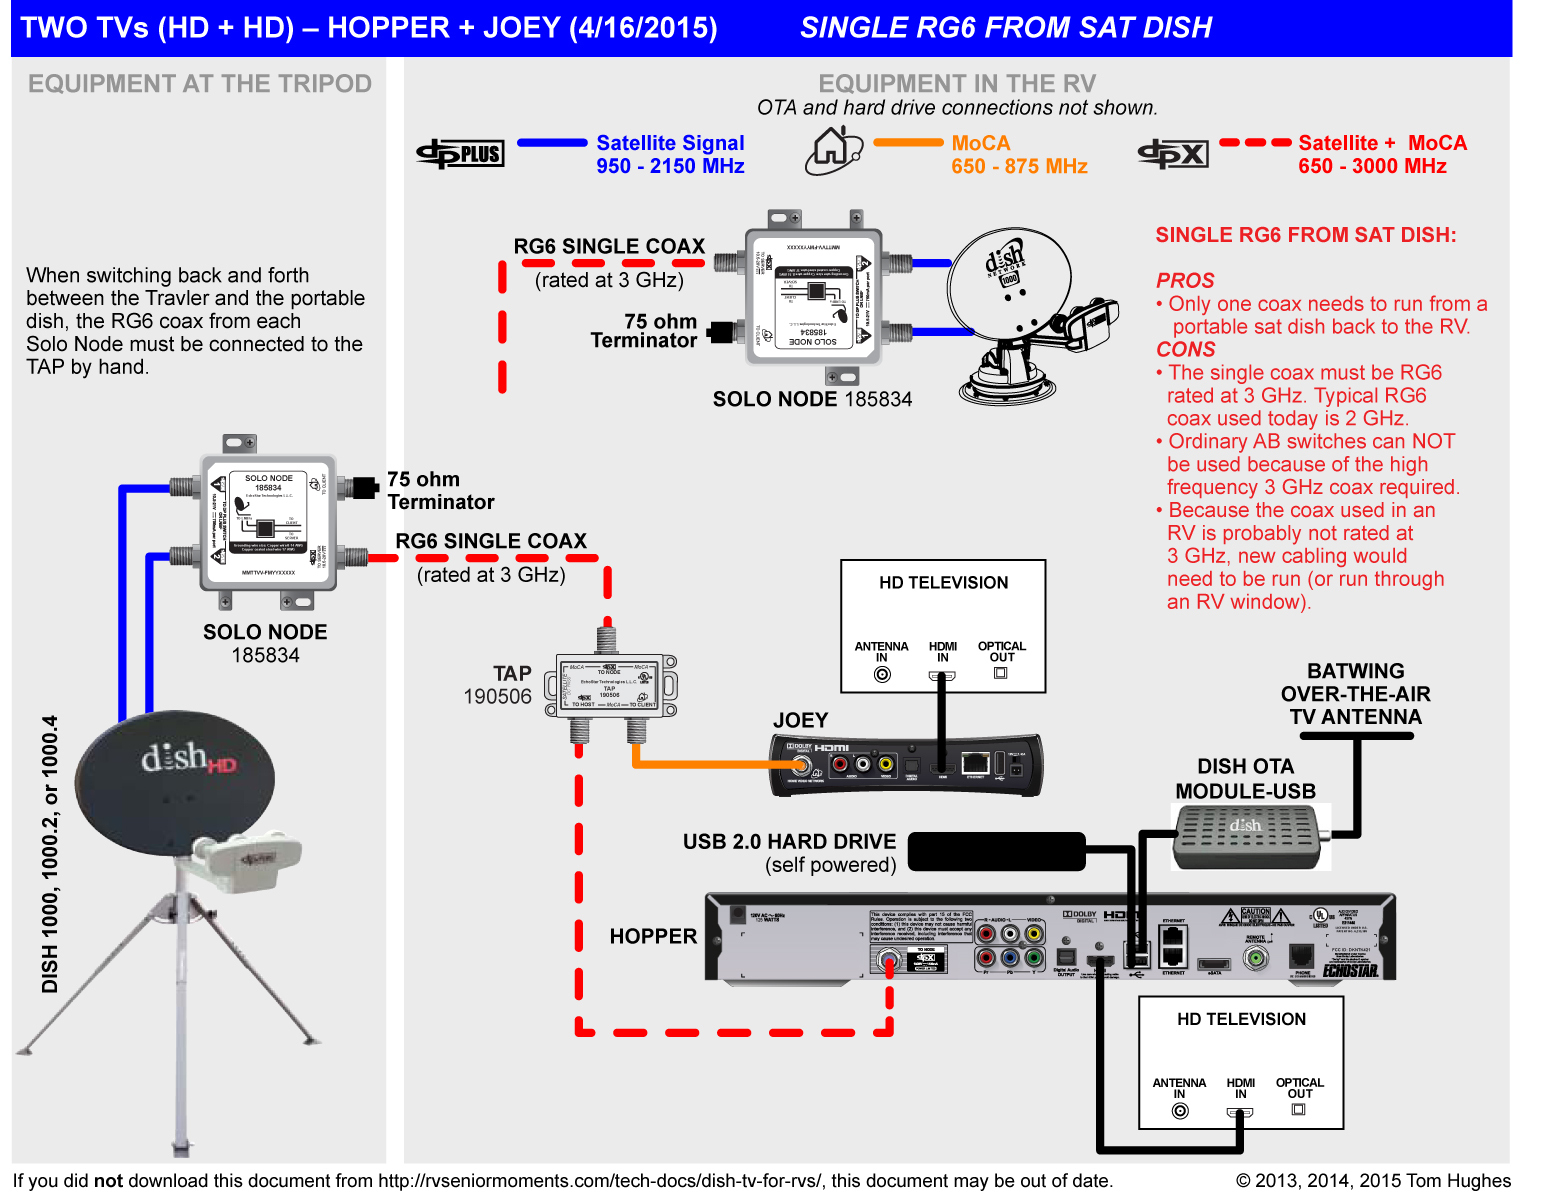 Dish Network 2 Tv Wiring Diagram | Wiring Diagram - How To Connect 2 Tvs To One Dish Network Receiver Wiring Diagram